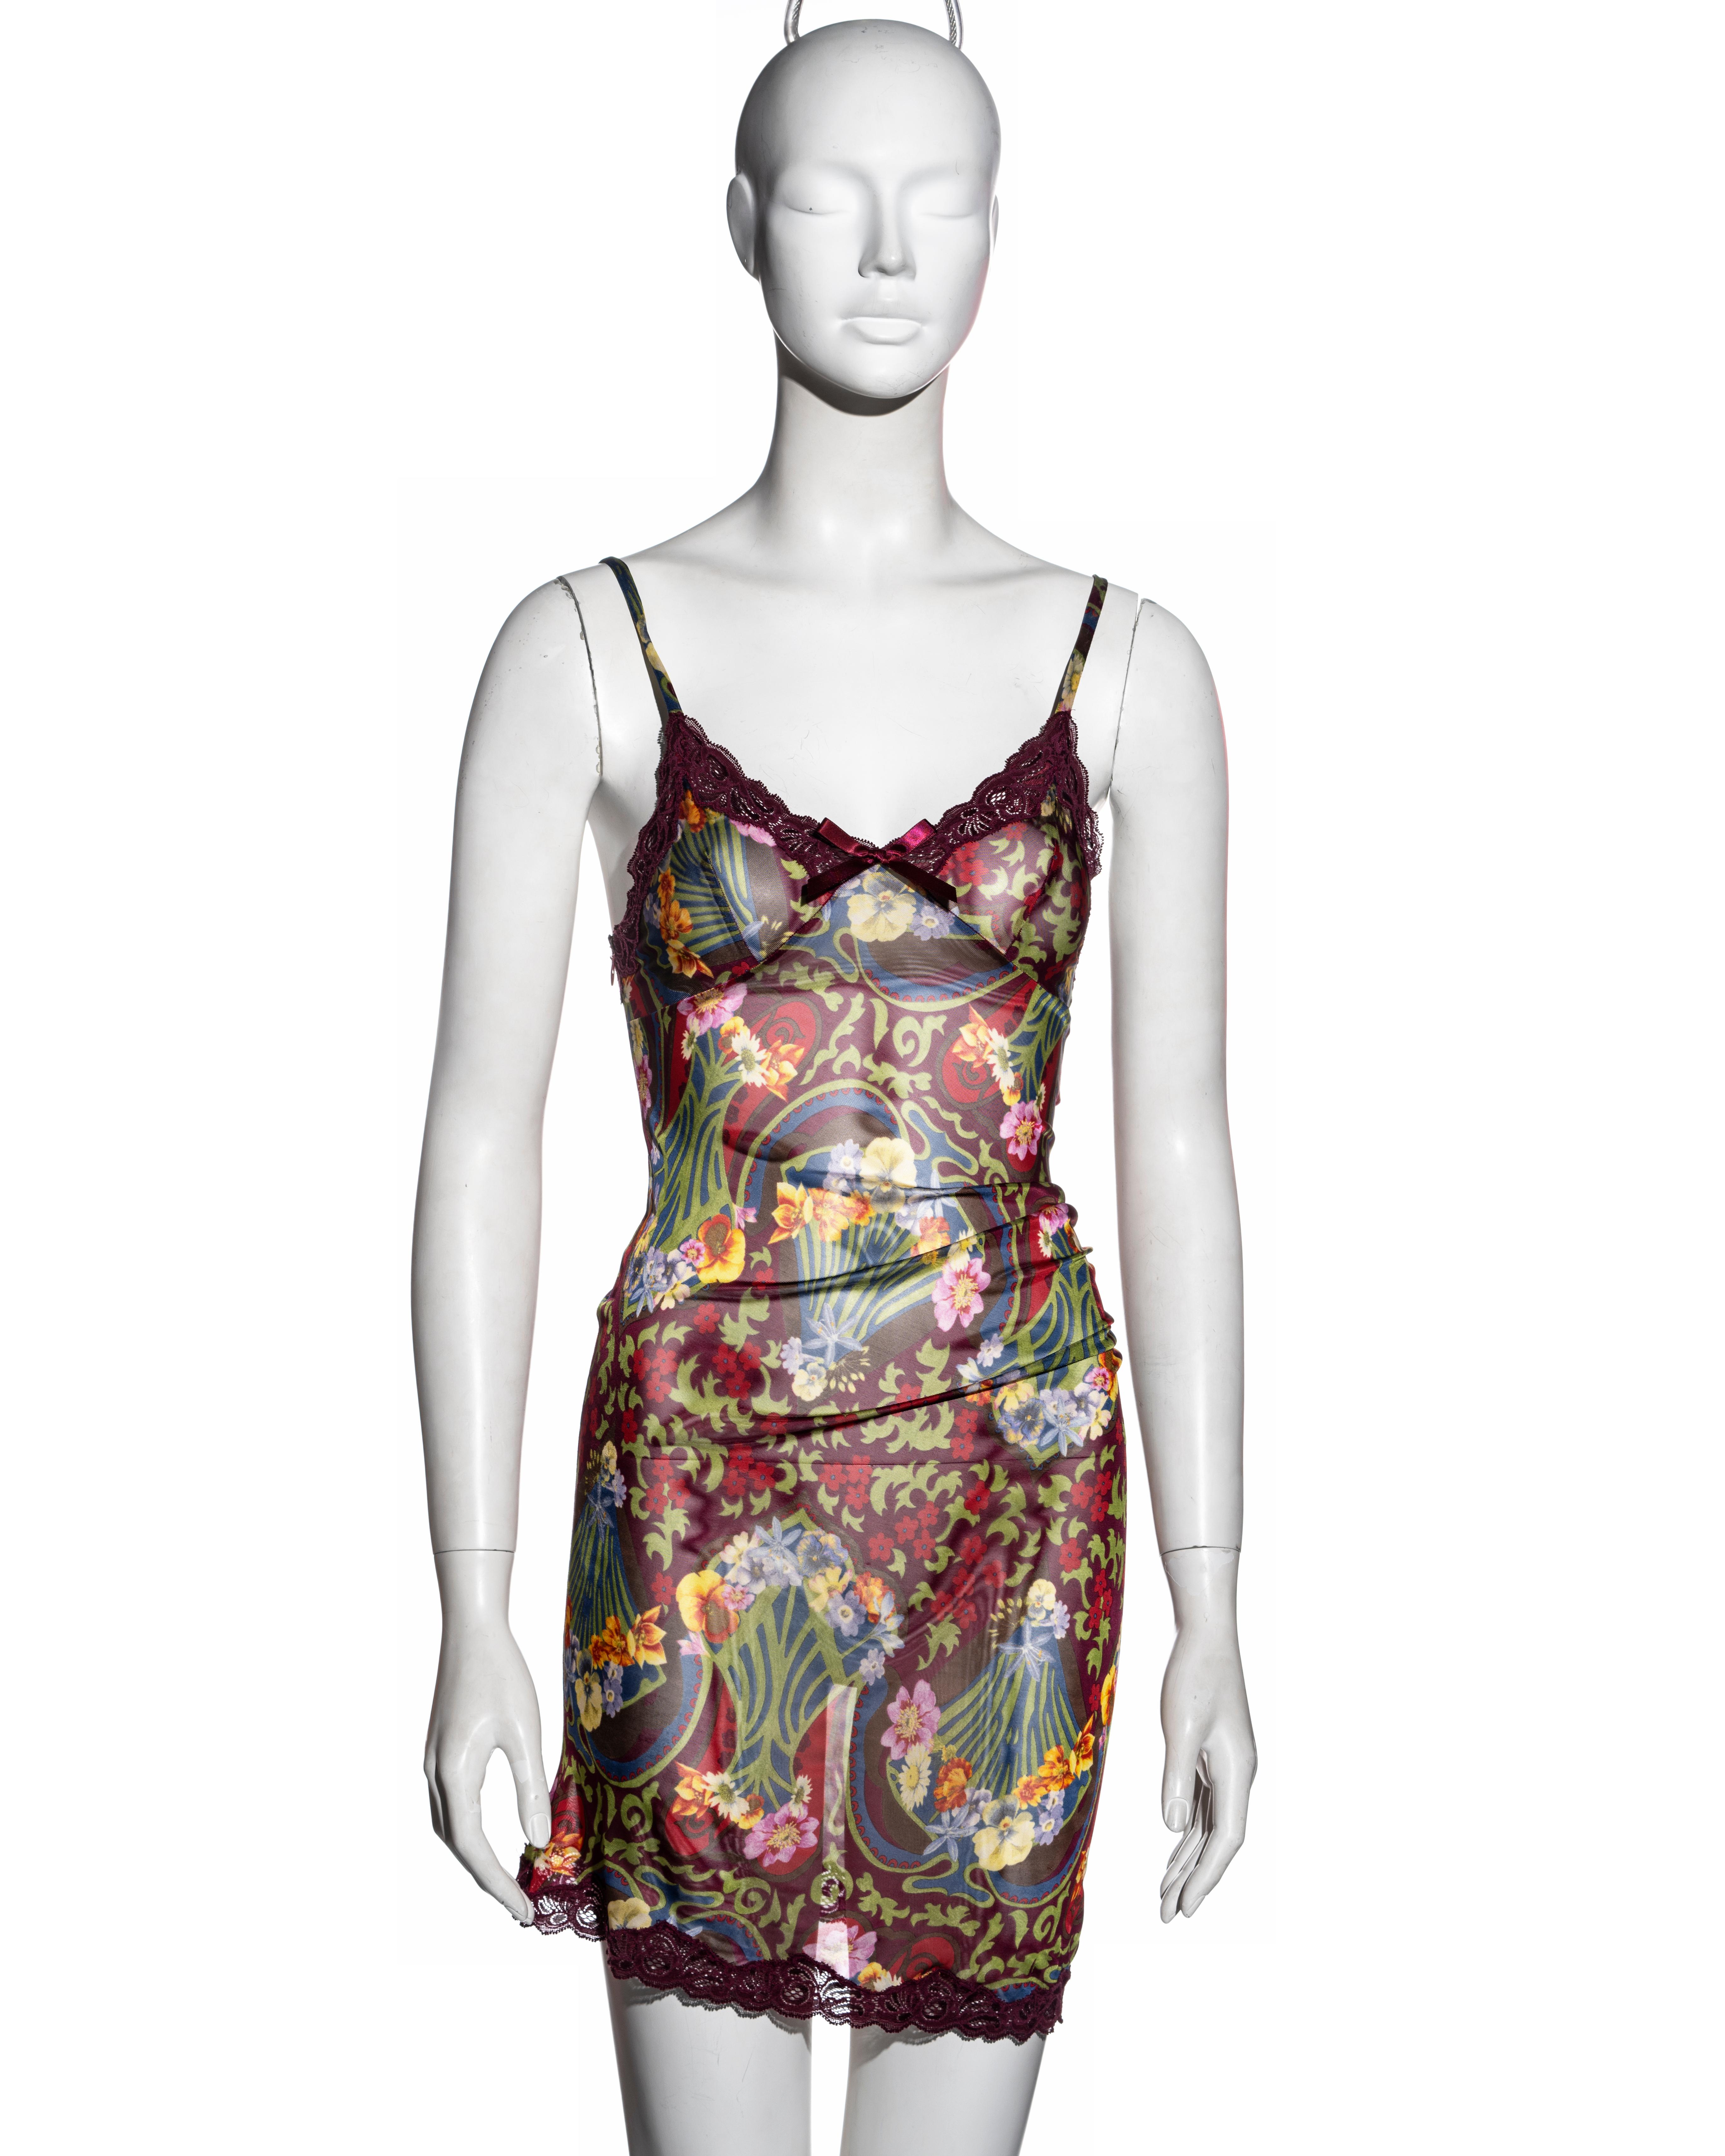 ▪ Christian Dior burgundy floral mini slip dress
▪ Designed by John Galliano
▪ Art Nouveau inspired floral print 
▪ Lace trim 
▪ Ribbon bow detail 
▪ Twisted cut allows the fabric to ruche at the waist and create an asymmetric hemline 
▪ FR 36 - UK